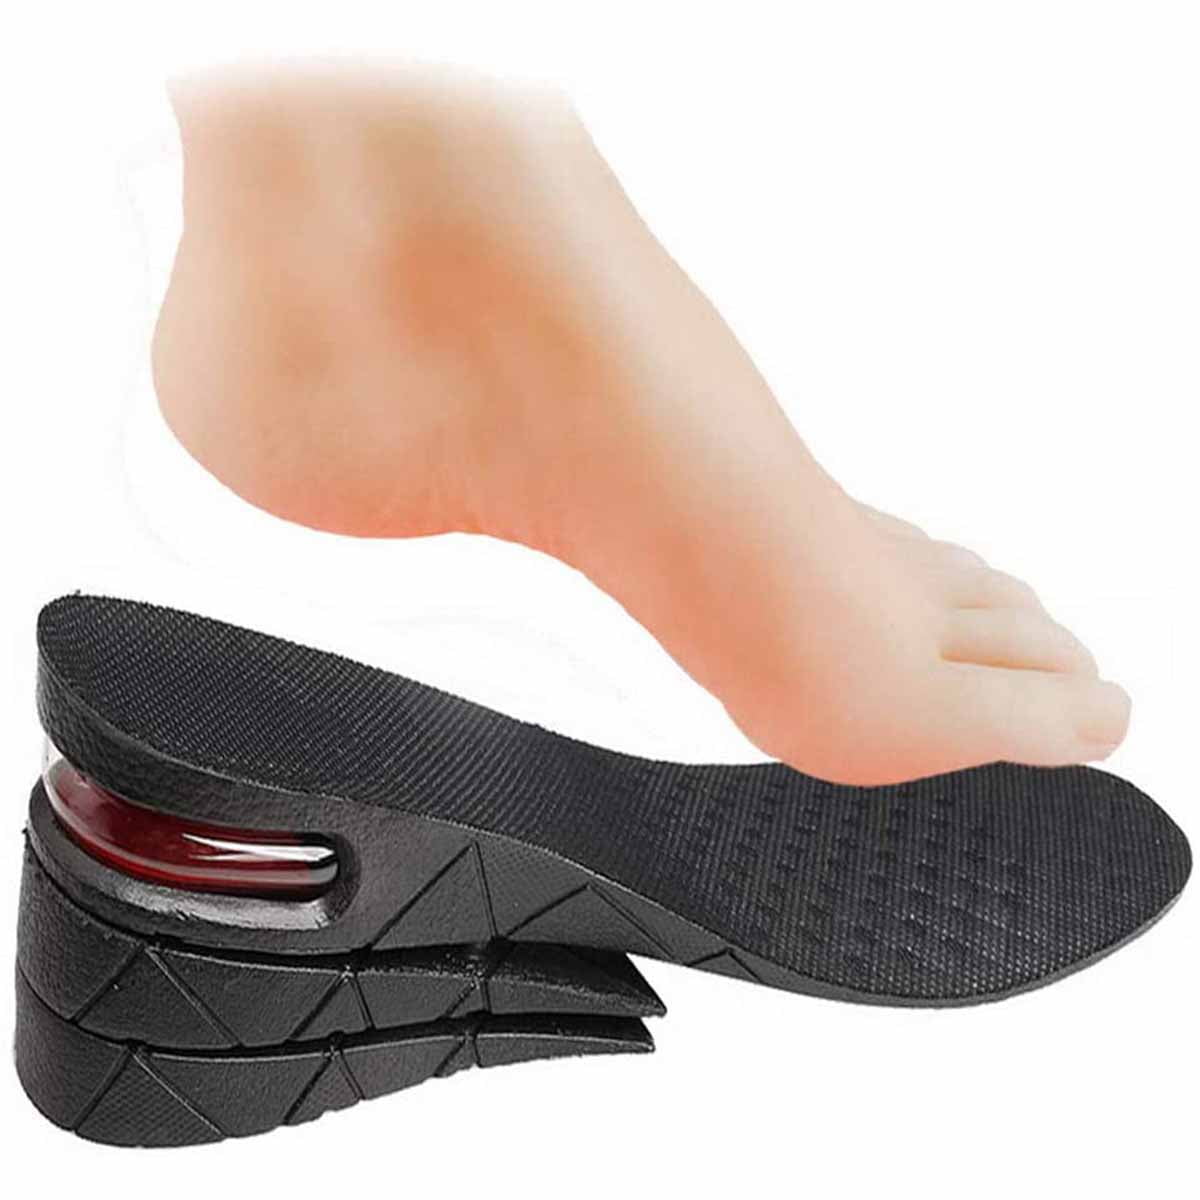 3 Sizes Breath Shoe Insole Air Cushion Heel insert Increase Taller Height Lift P 